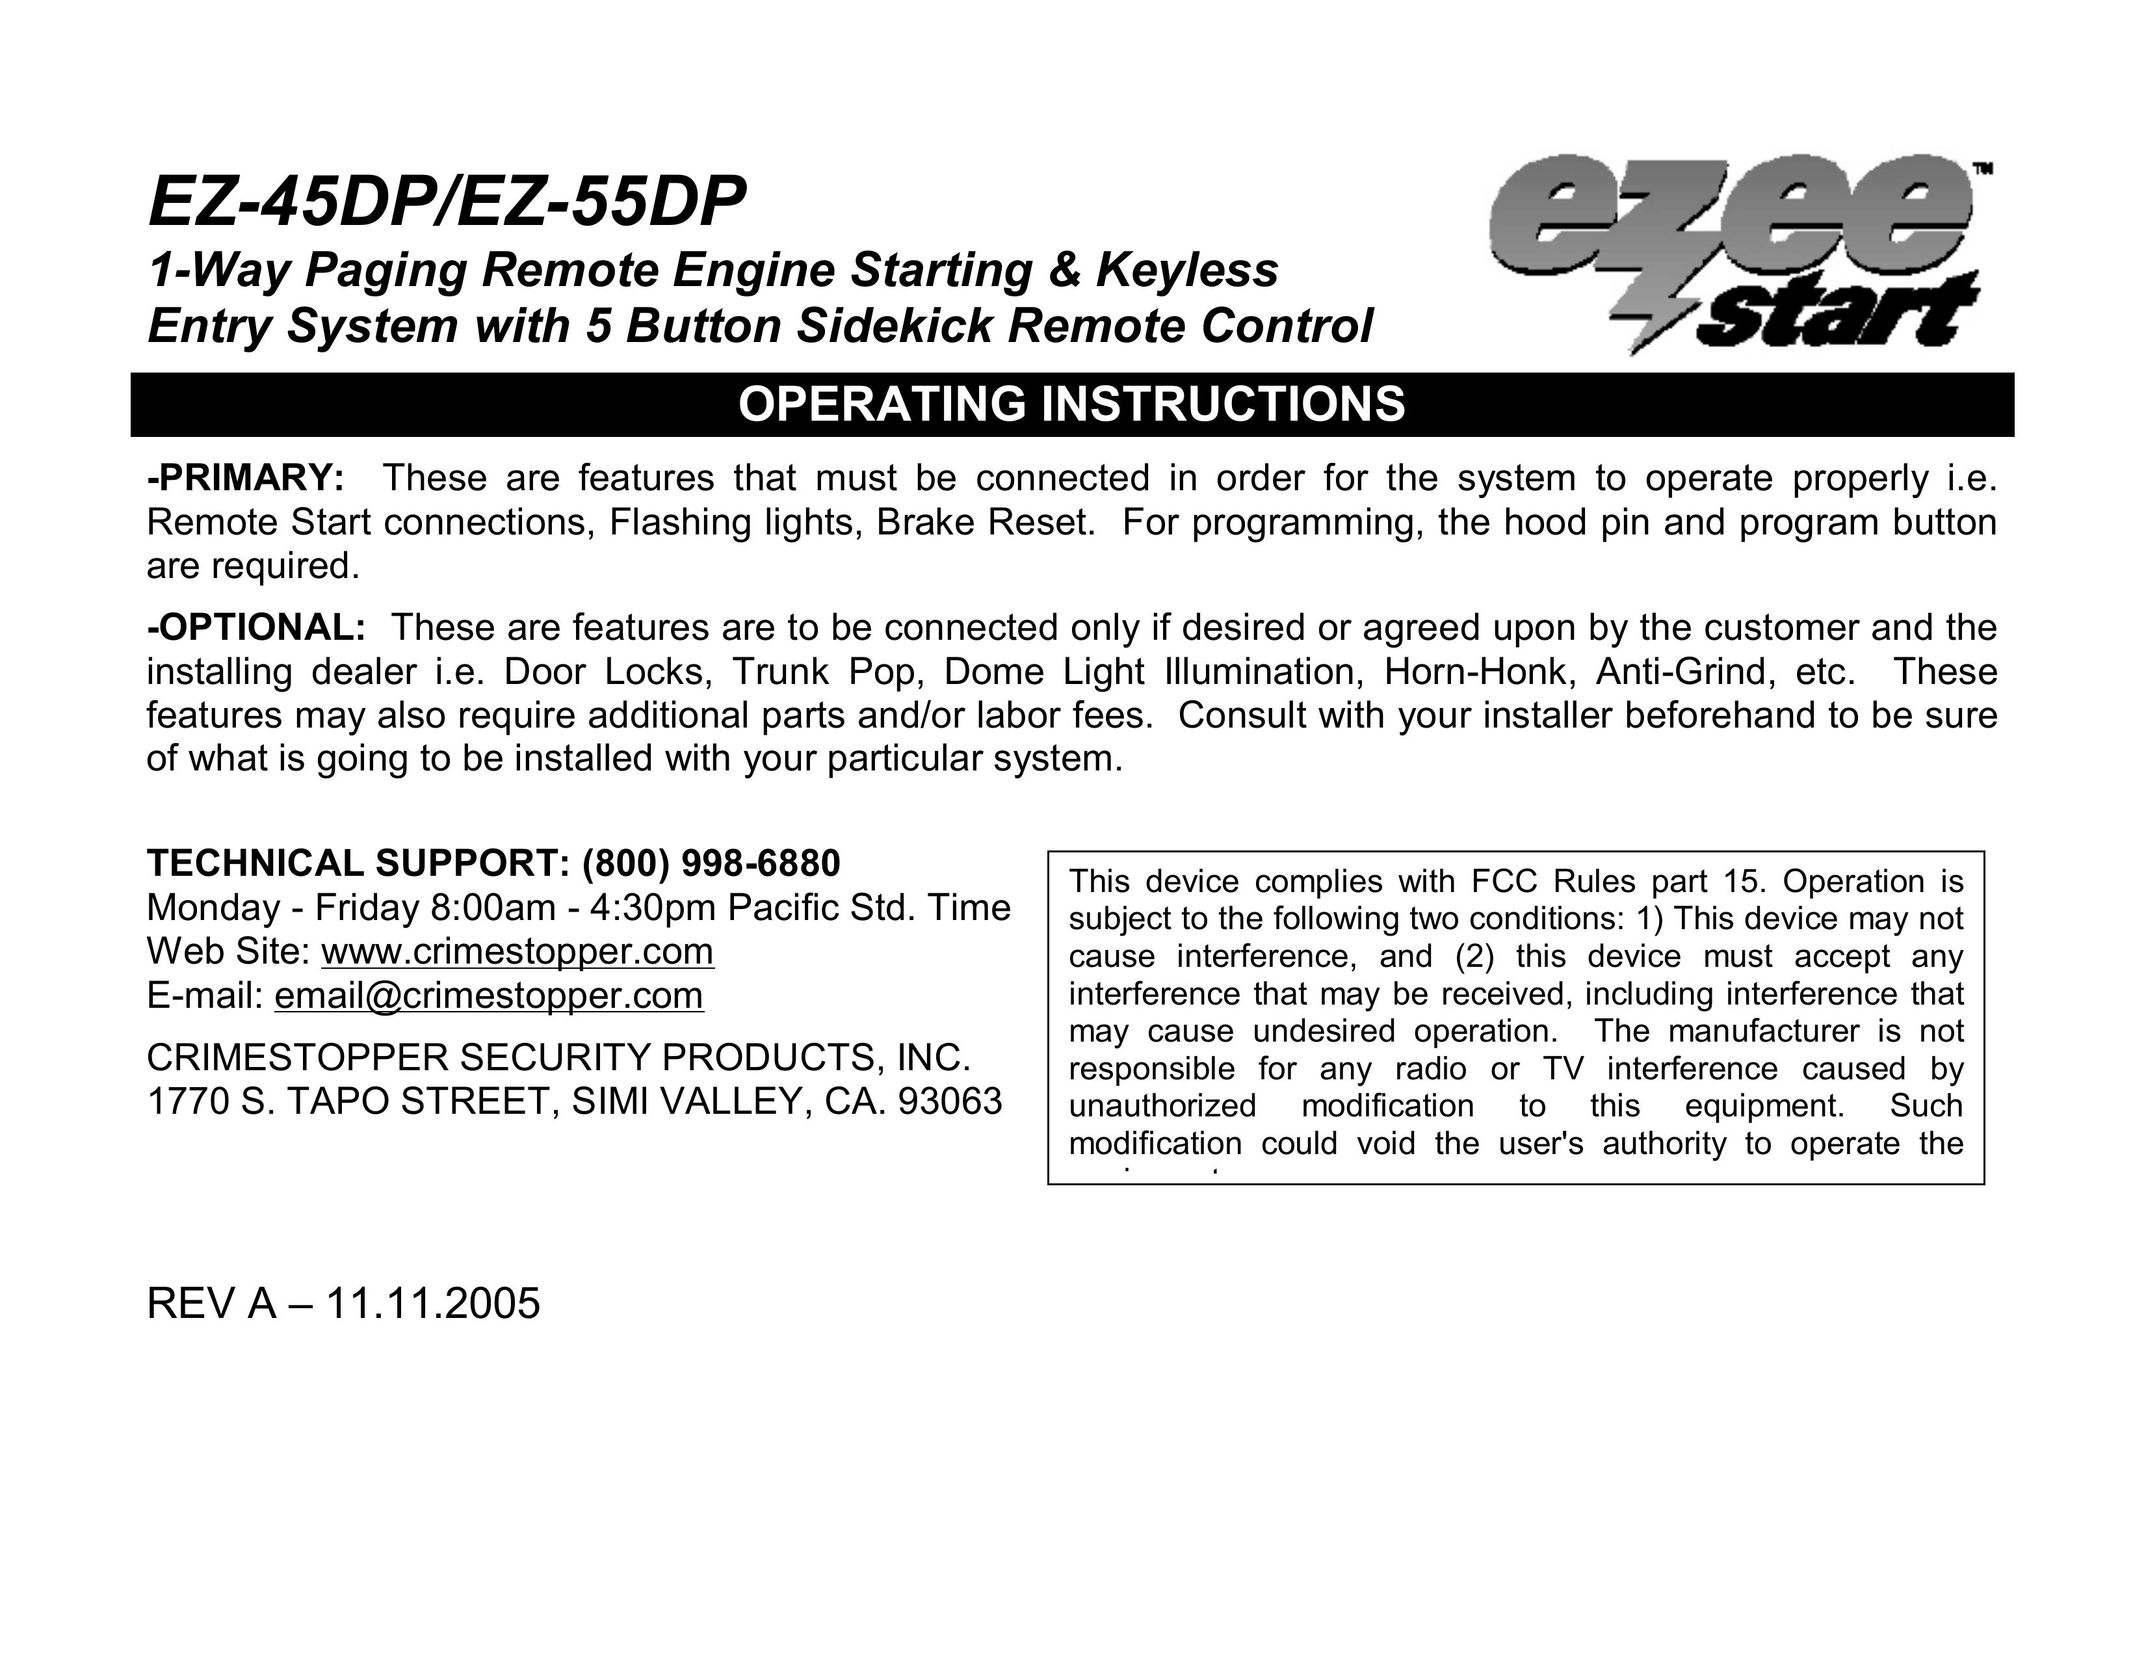 Crimestopper Security Products EZ-45DP Pager User Manual